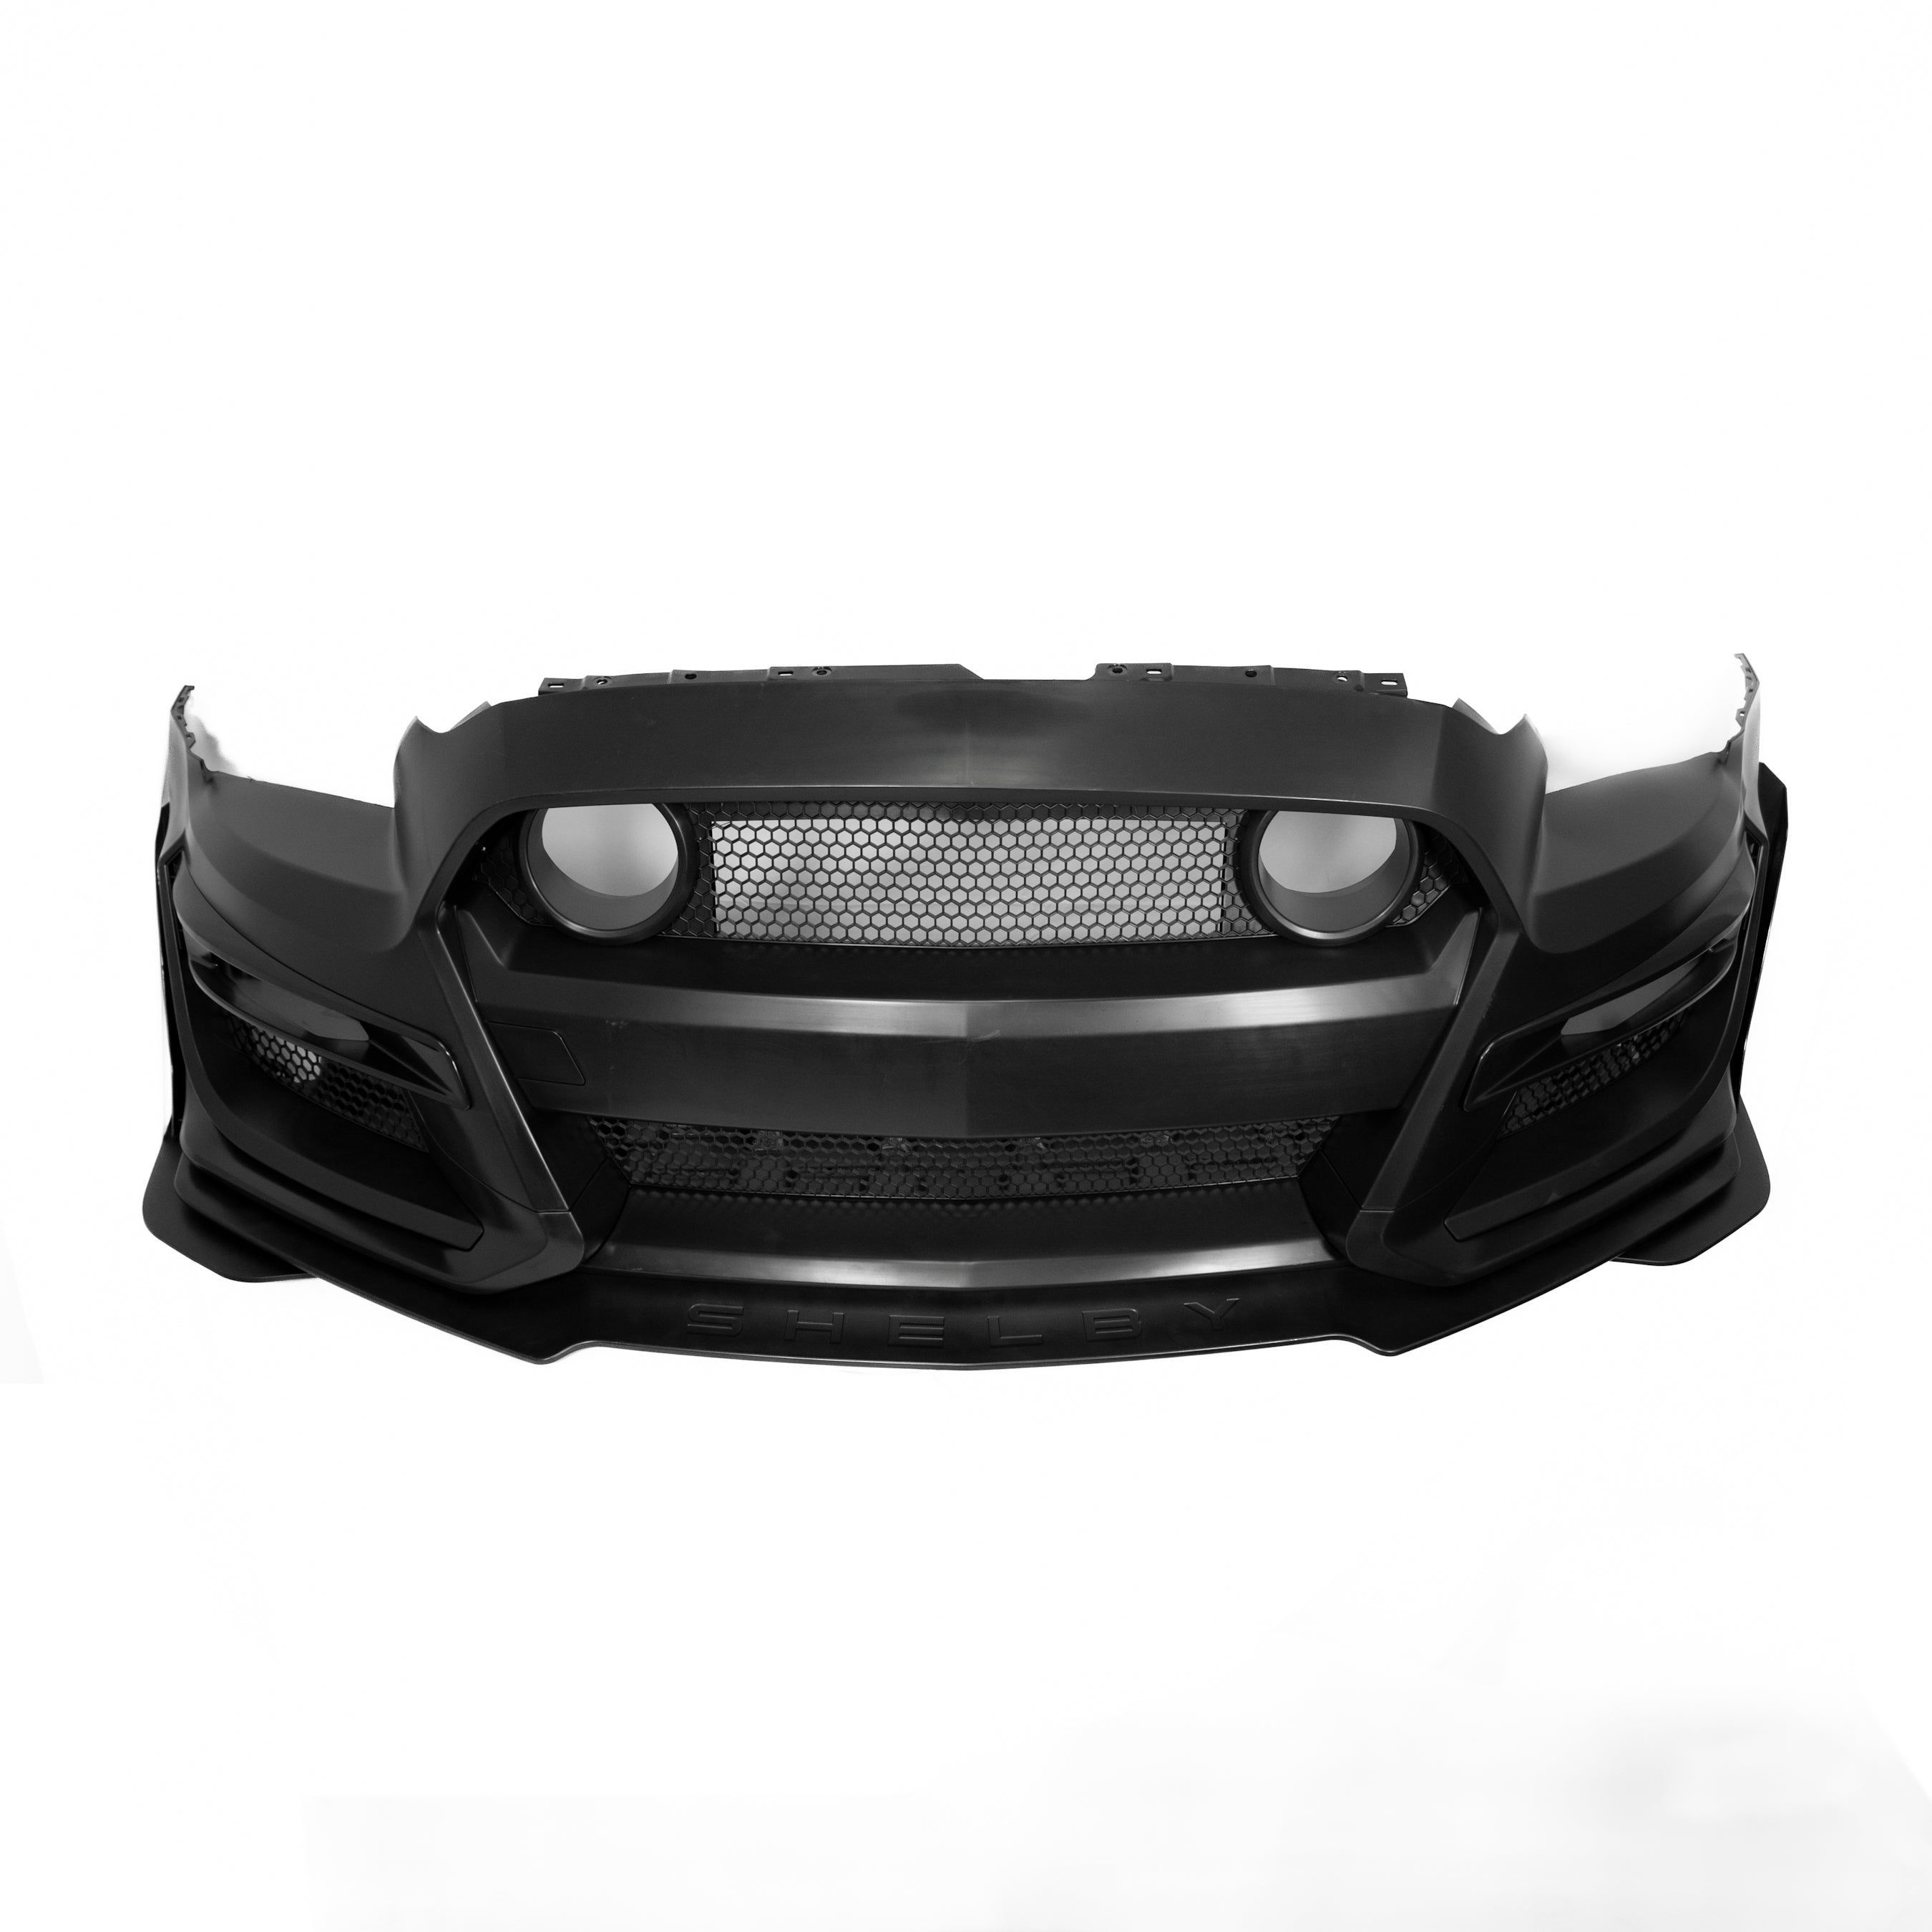 2010-2014 Ford Mustang S197 GT/V6 GT500 Front Bumper Conversion Complete kit